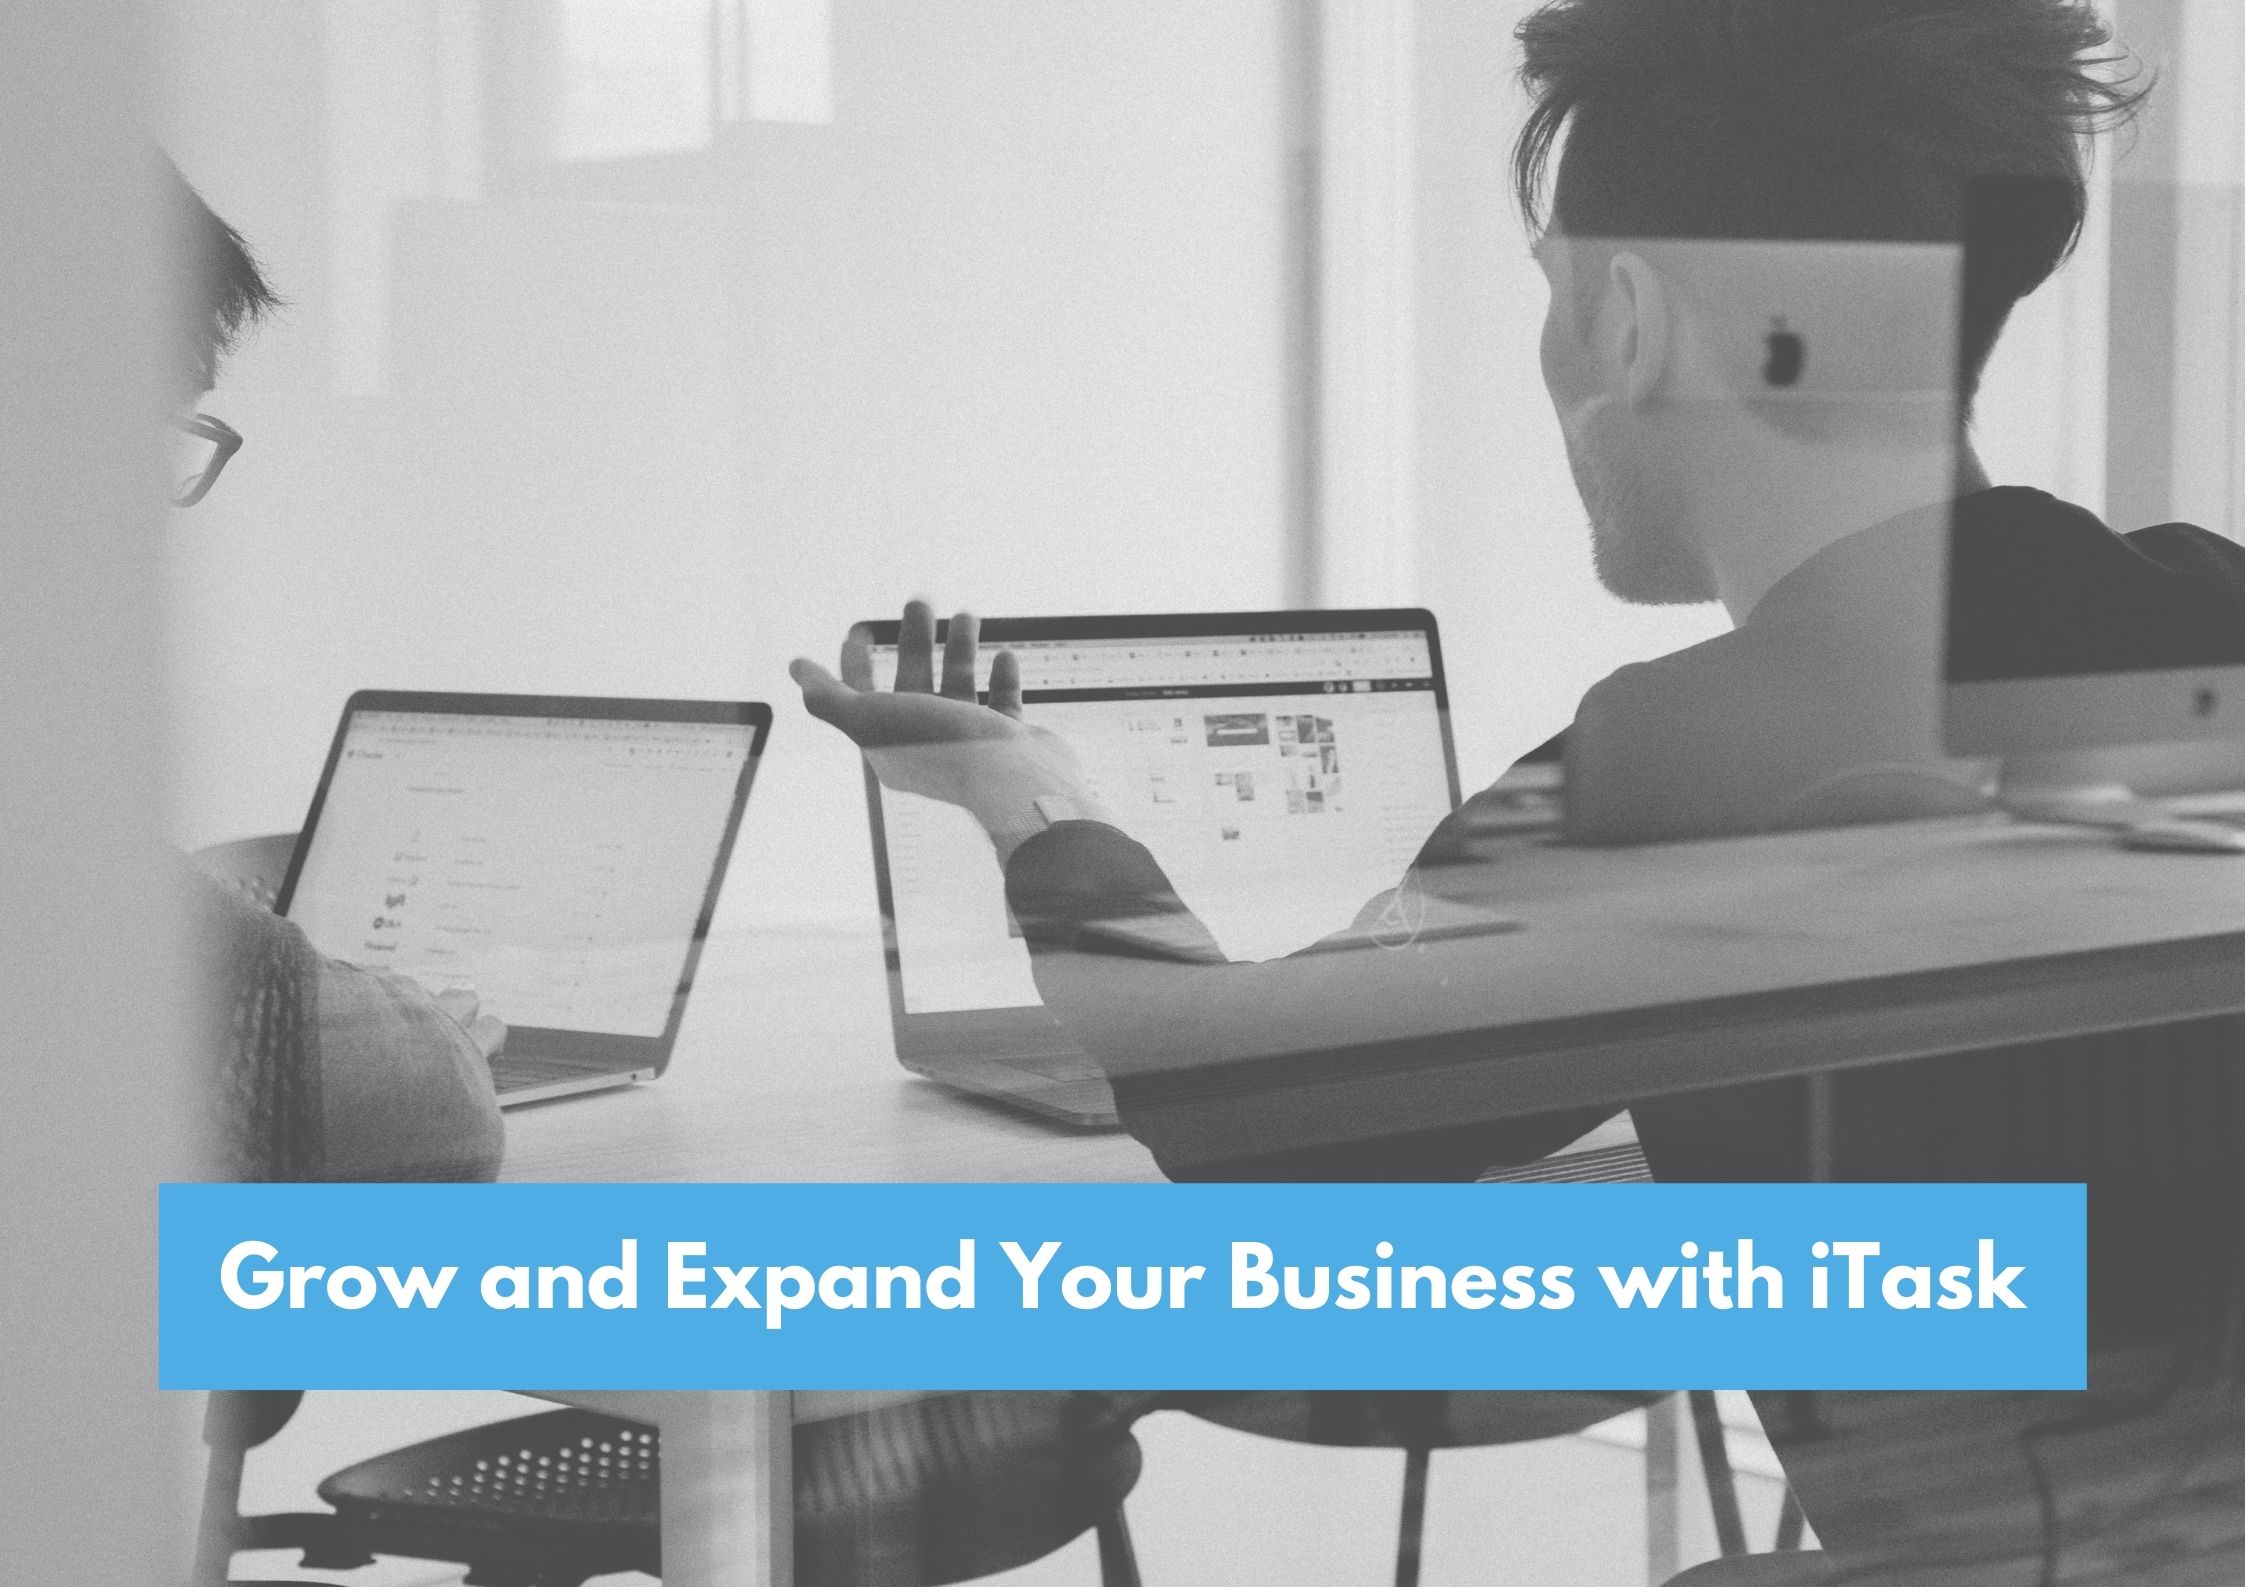 Grow and Expand Your Business with iTask